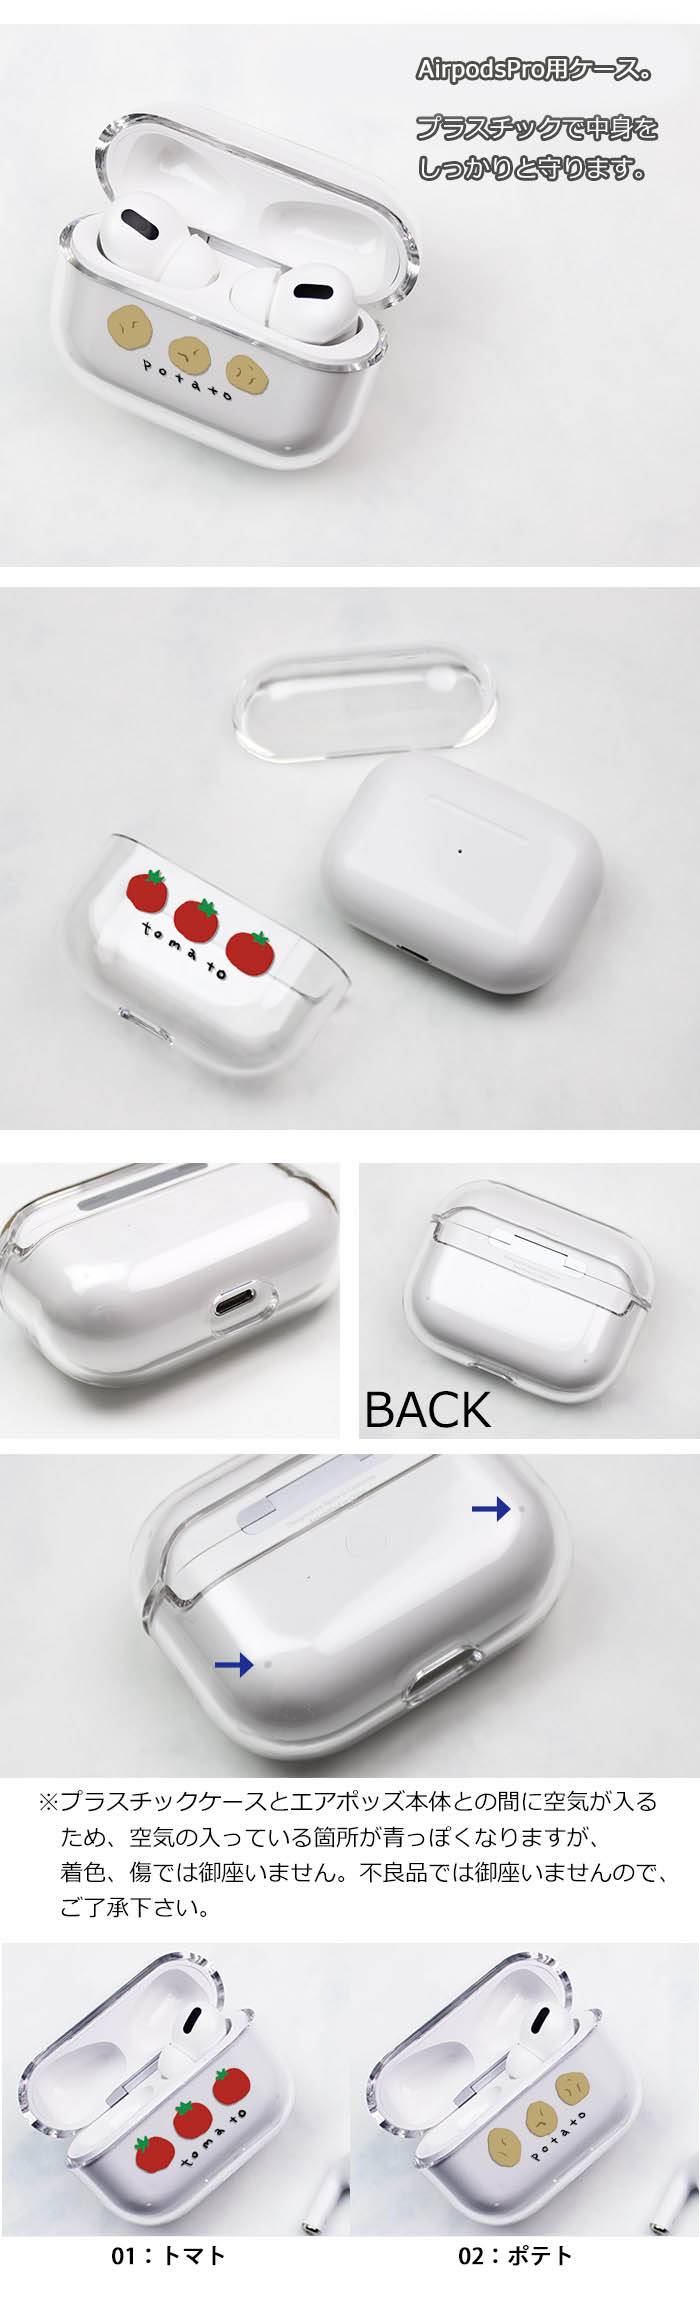 AirPods Proケース Airpods pro ケース airpods pro カバー Air Pods 